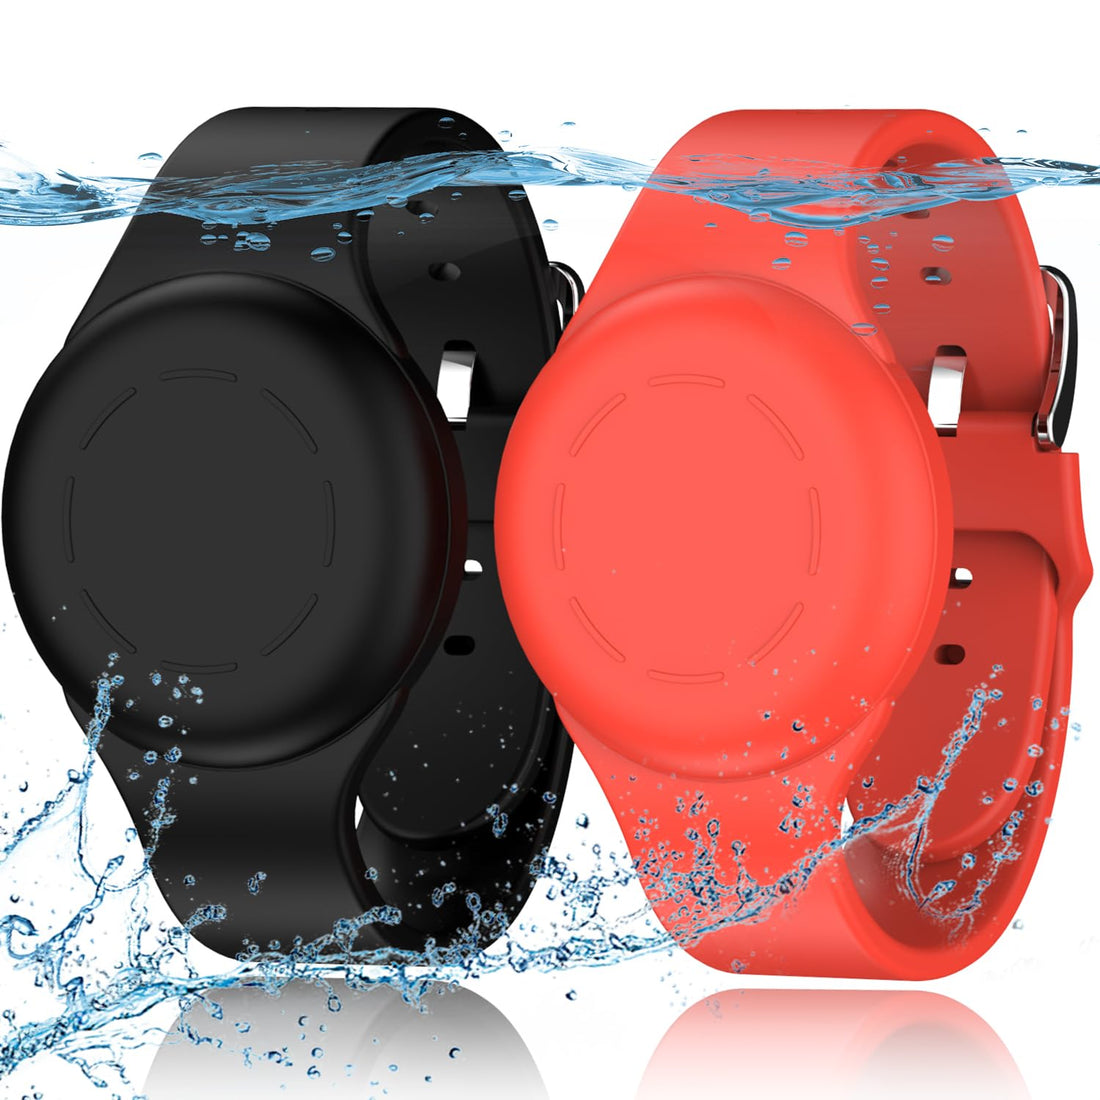 R-fun Waterproof Air Tag Bracelets for Kids [2 Pack] Compatible with Apple Air Tag Finders with Soft Silicone,Anti Lost GPS Item Finders Case Cover for Kids,Black/Red